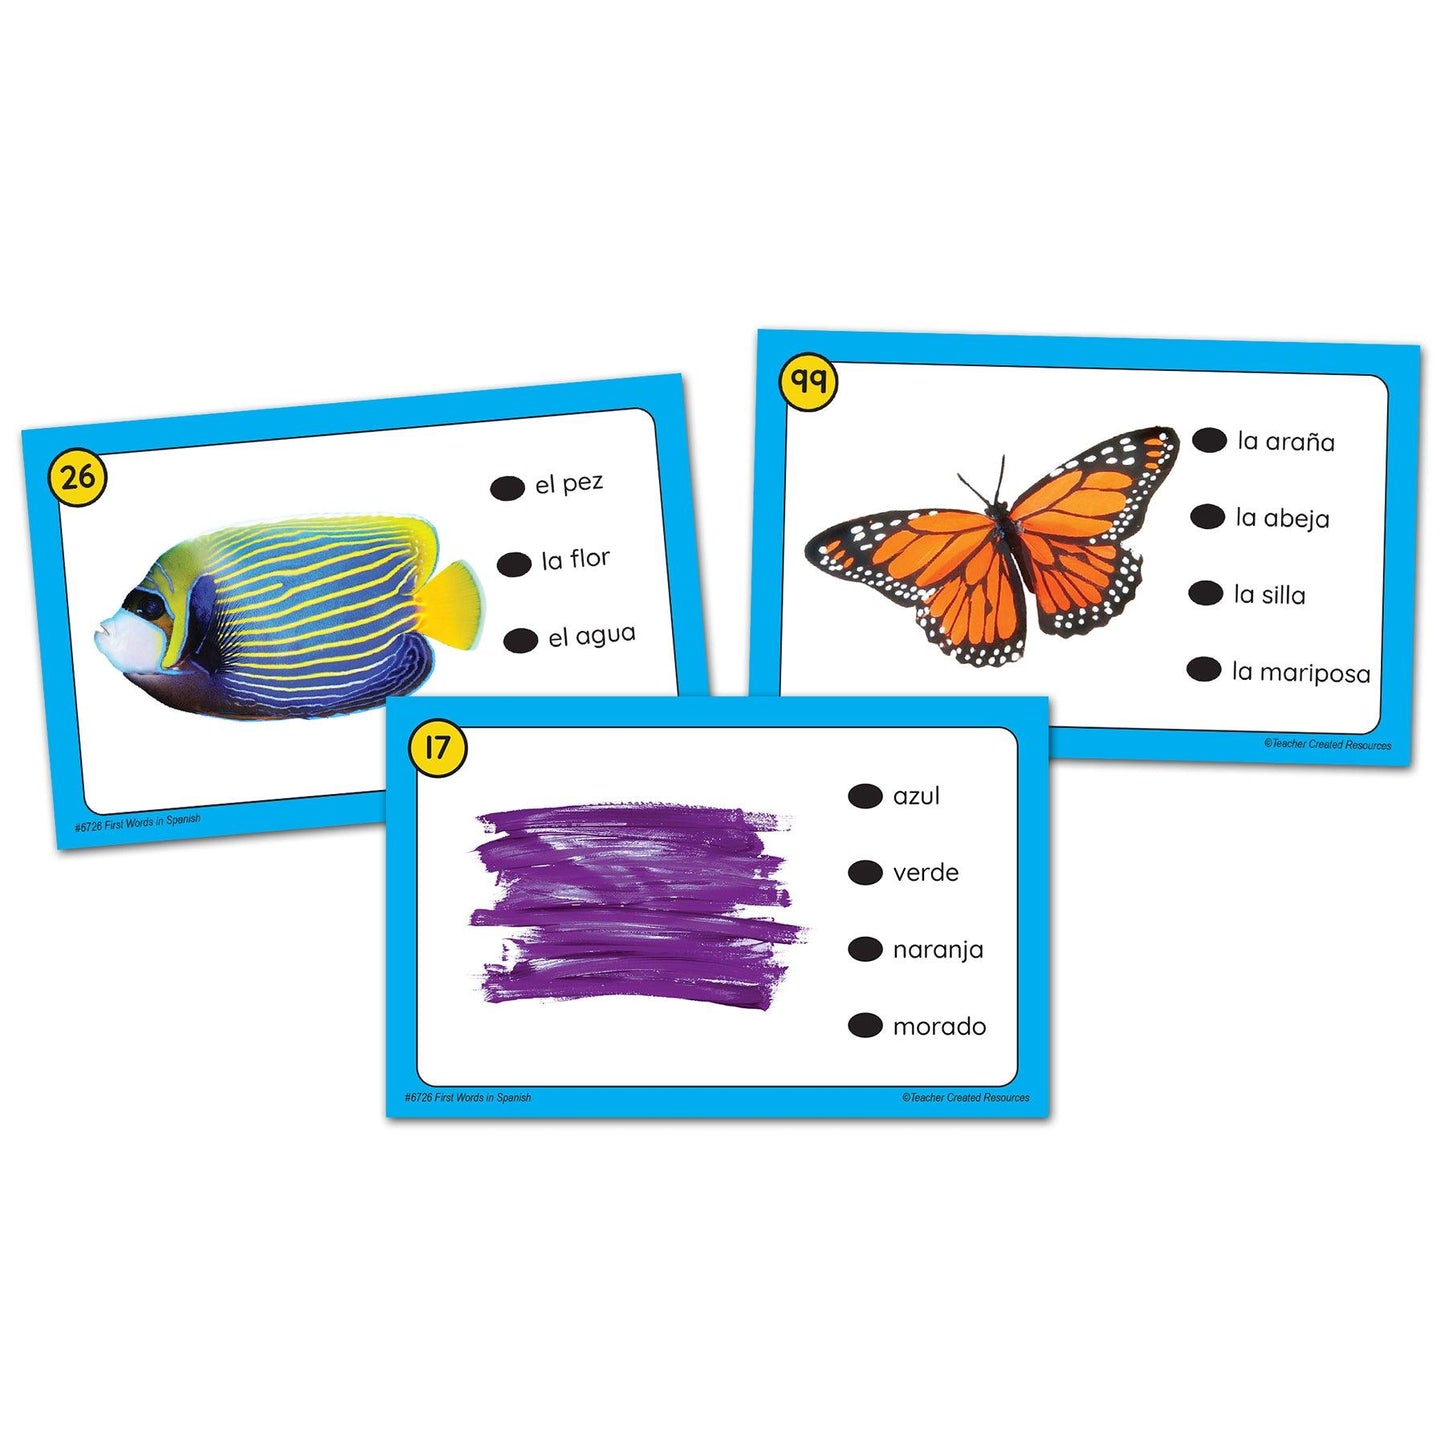 Power Pen® Learning Cards: First Words in Spanish - Loomini